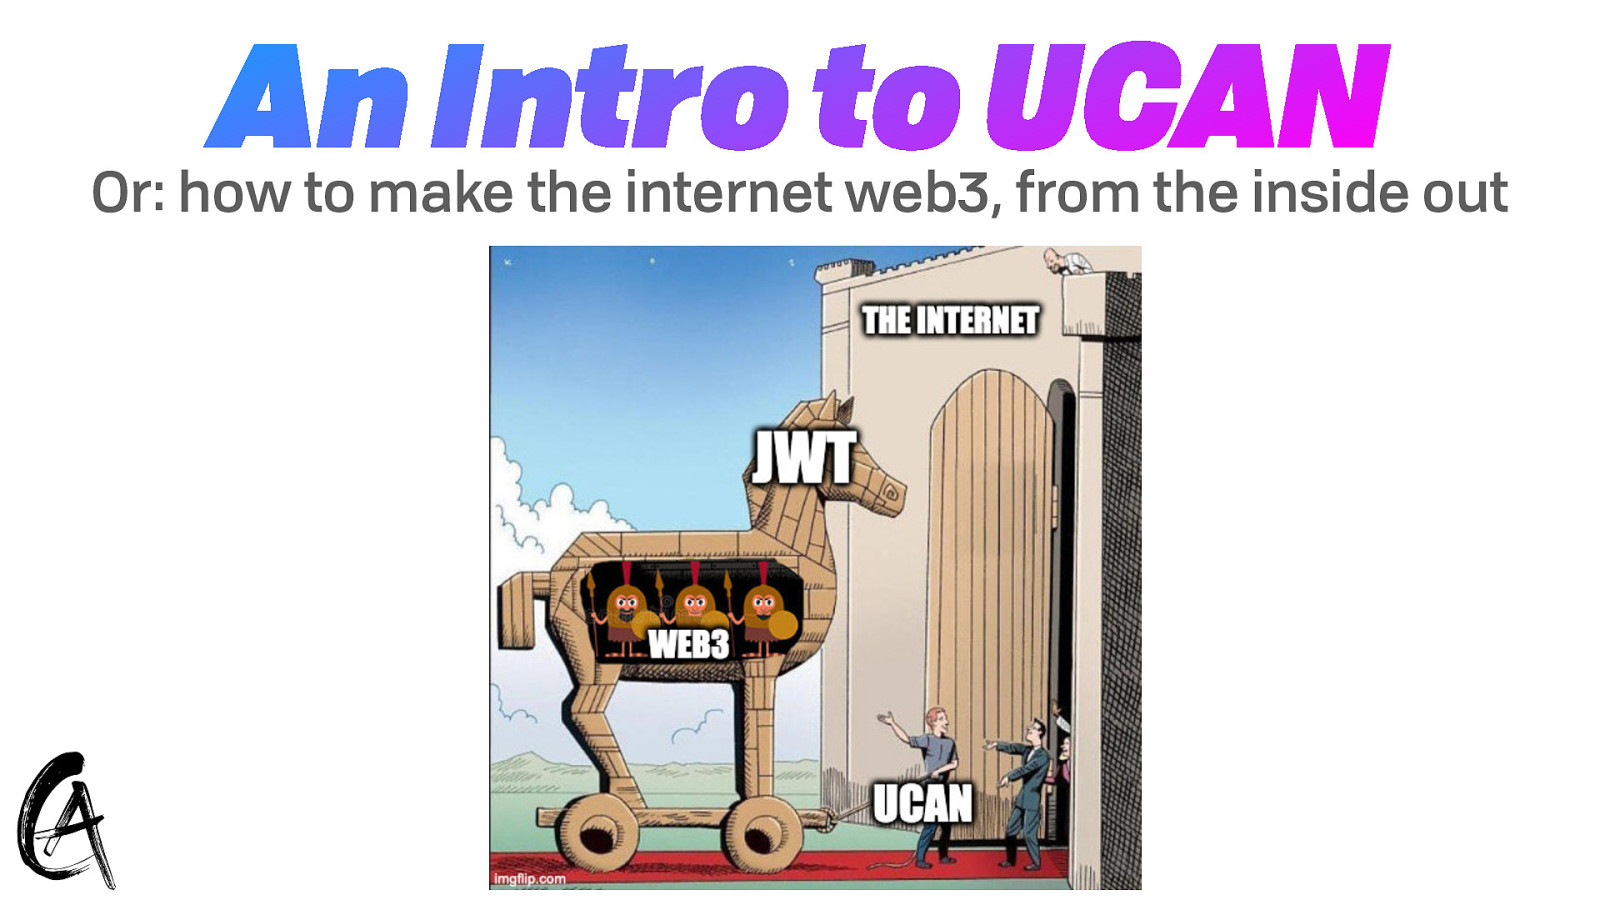 UCAN: How to make the internet web3, from the inside out